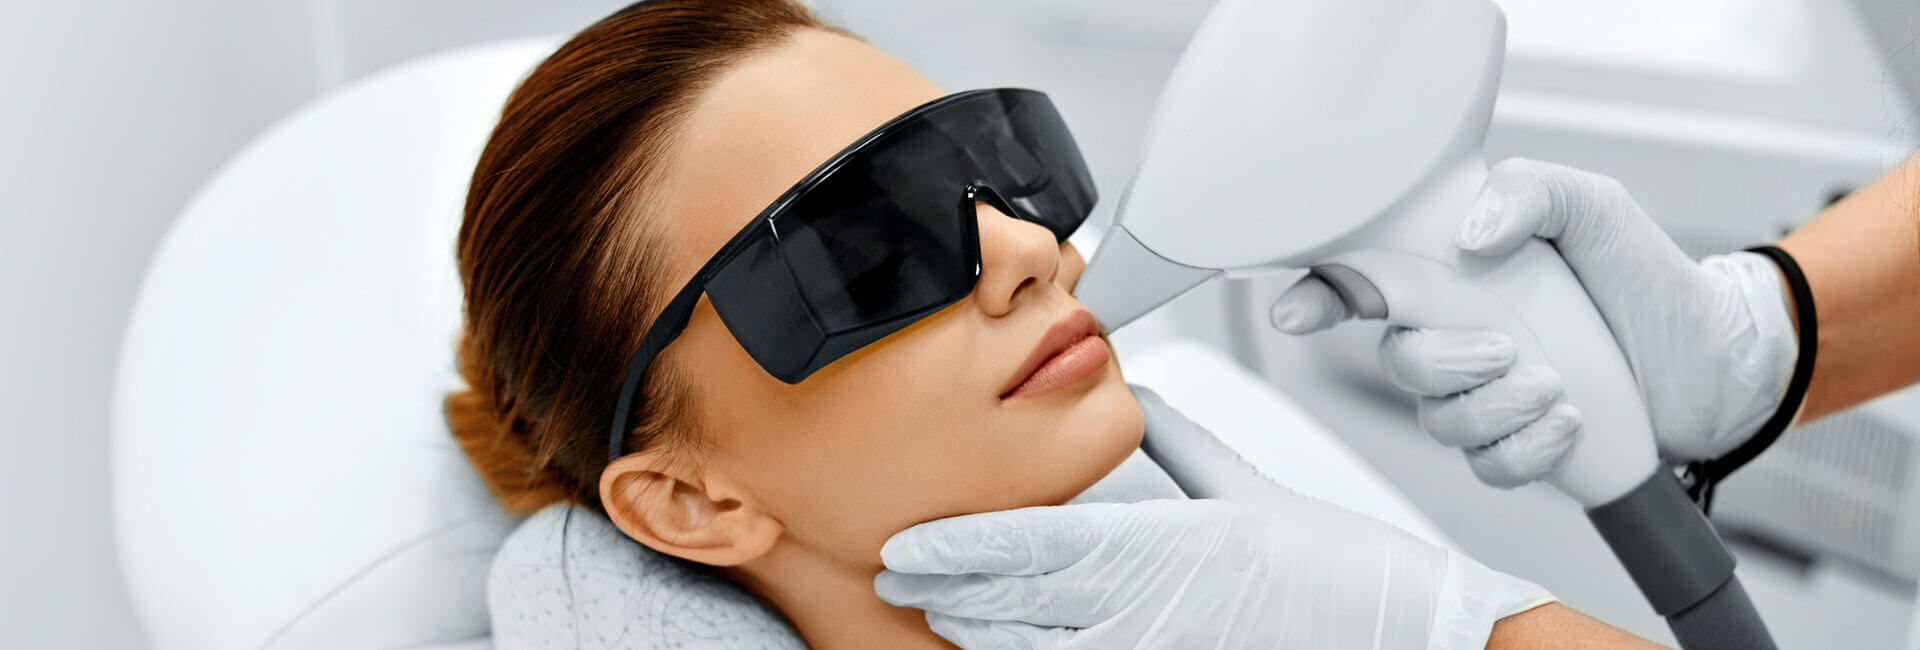 Lasers Treatment at Washington, DC and Annapolis, MD